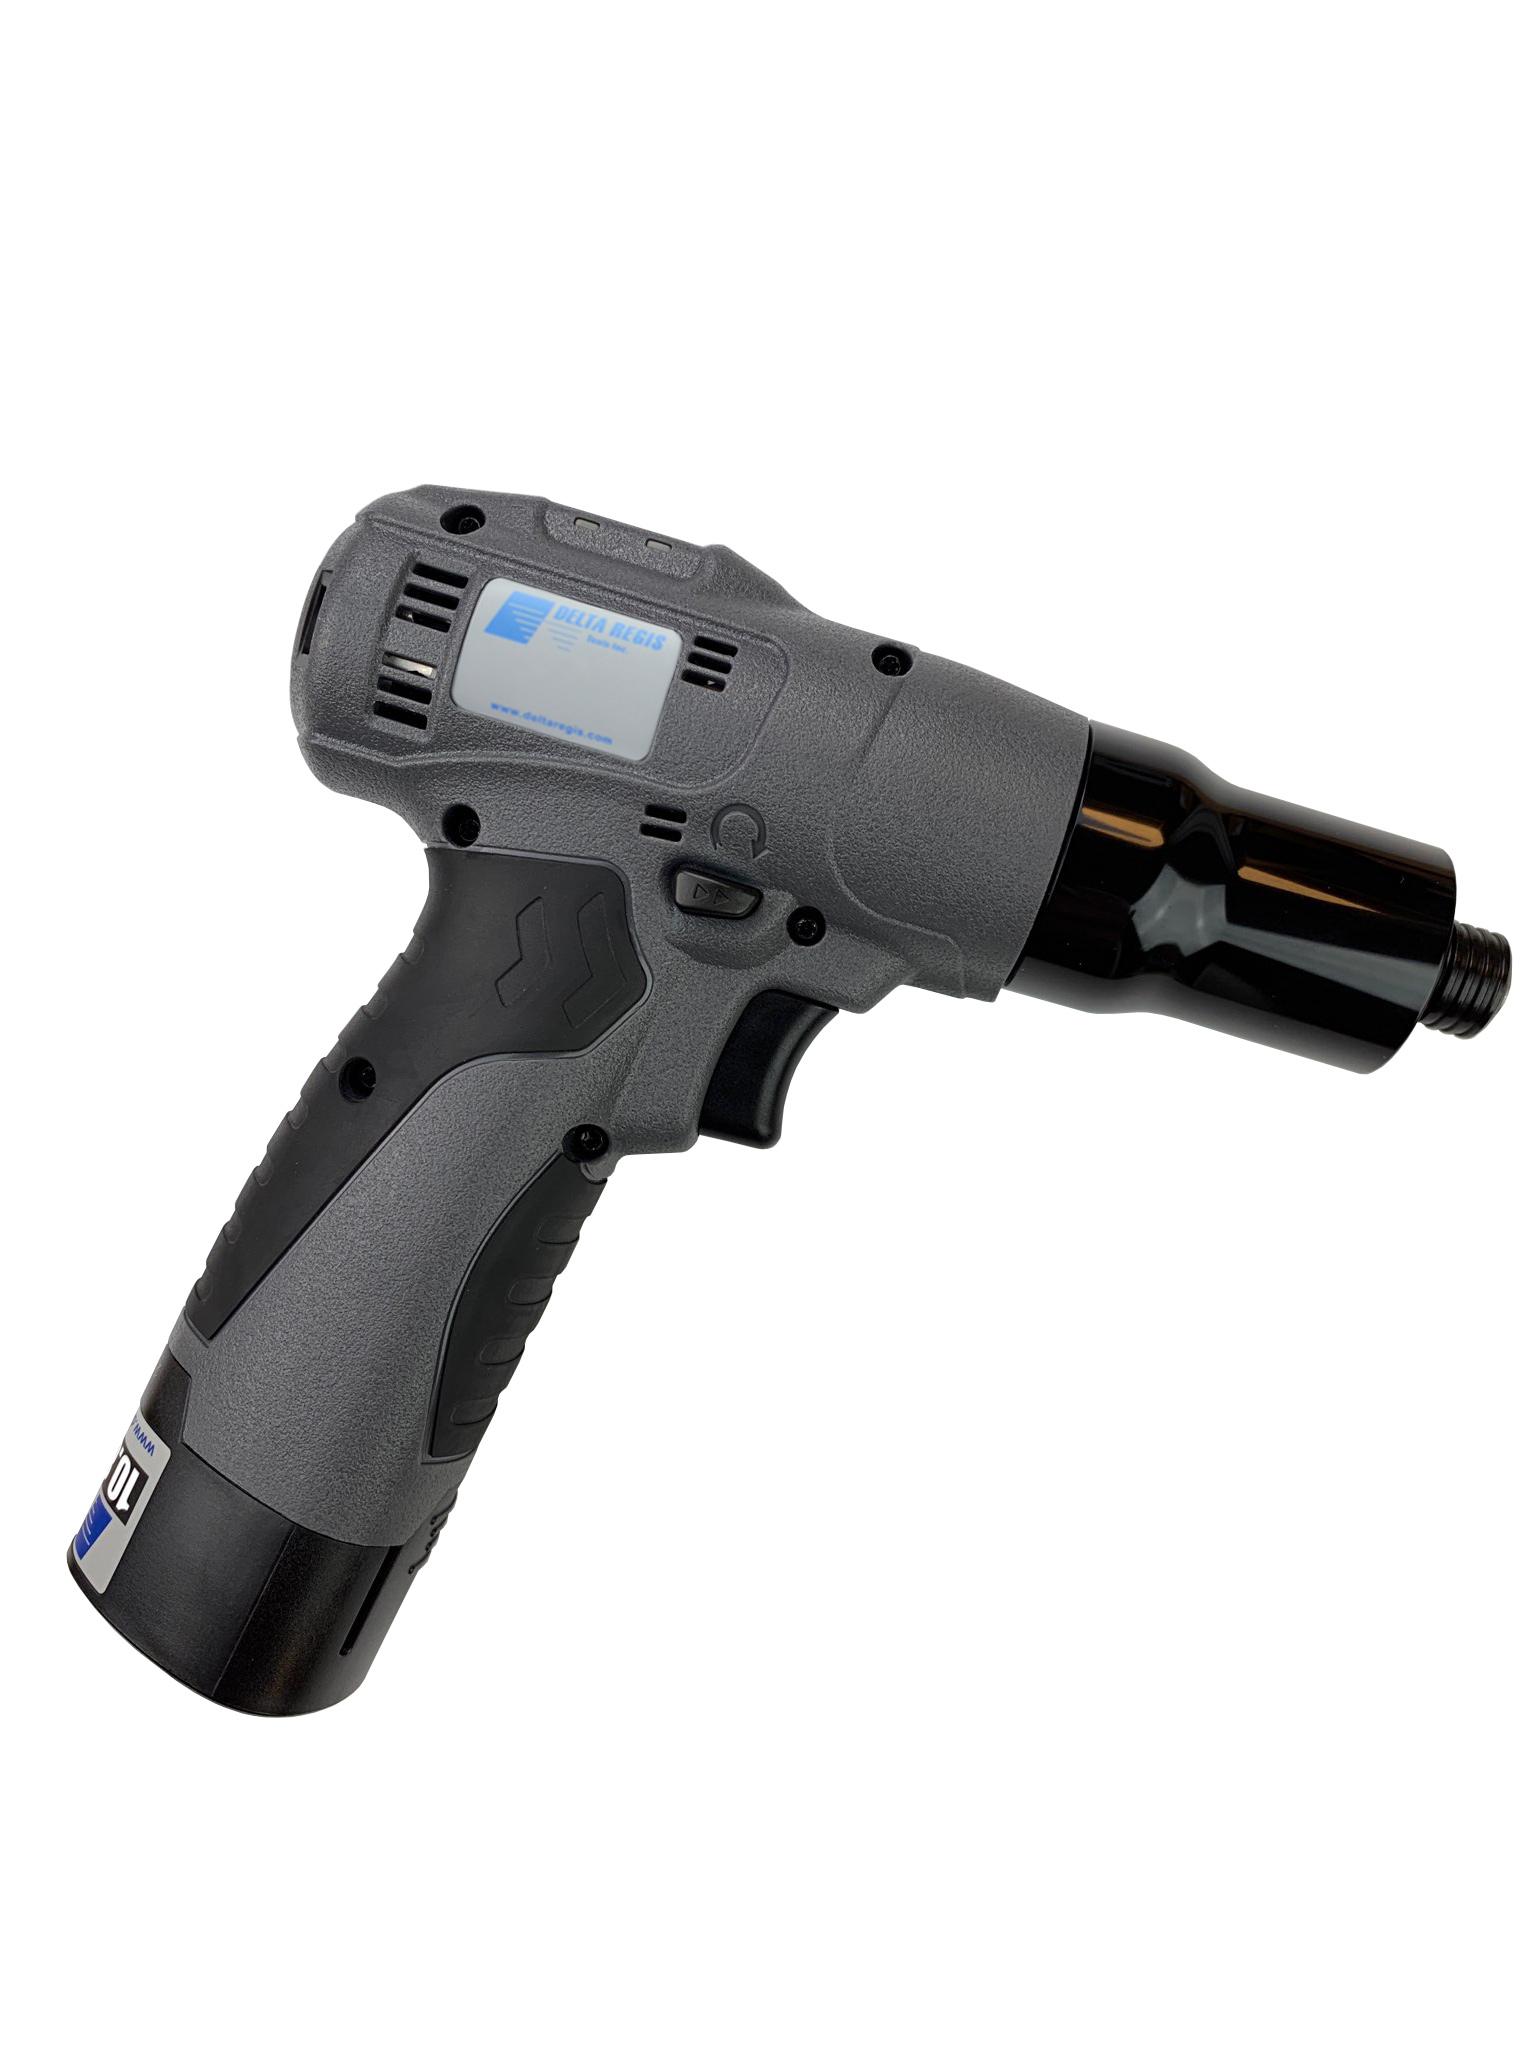 BSP824 Tool OnlyCordless Torque Screwdriver(0.5-2.0 Nm)(4.4-18 in-lbs)